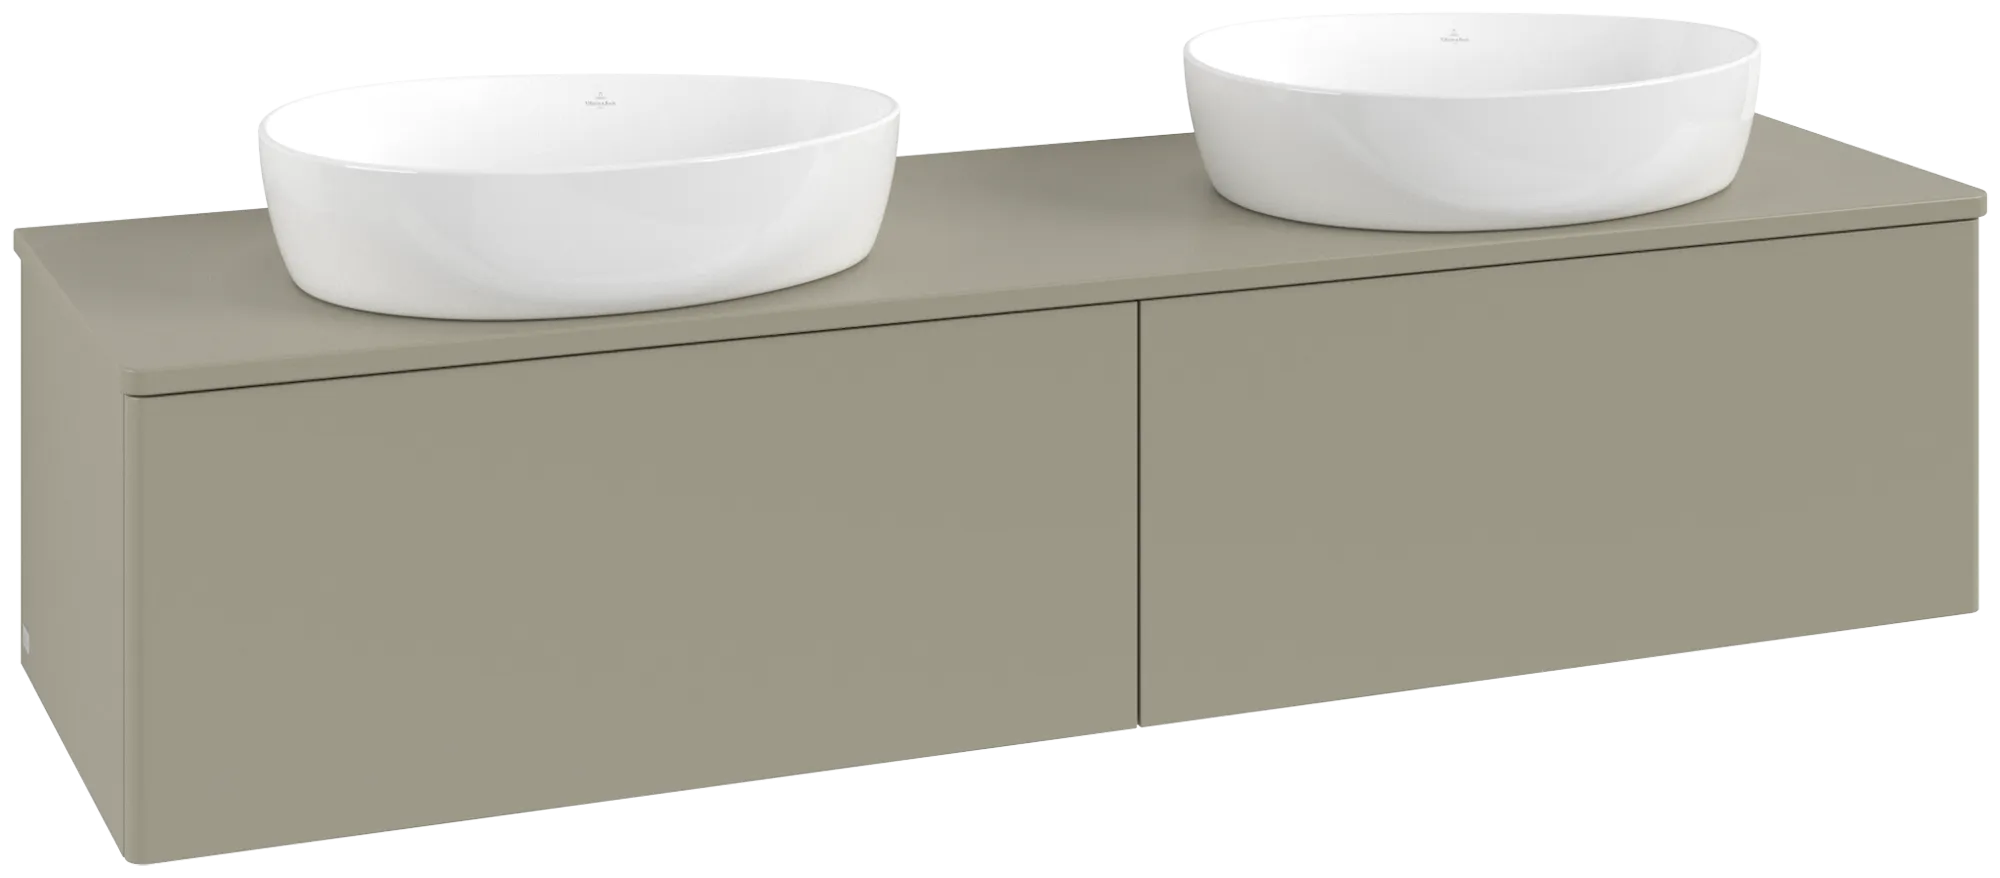 Picture of VILLEROY BOCH Antao Vanity unit, 2 pull-out compartments, 1600 x 360 x 500 mm, Front without structure, Stone Grey Matt Lacquer / Stone Grey Matt Lacquer #K39050HK